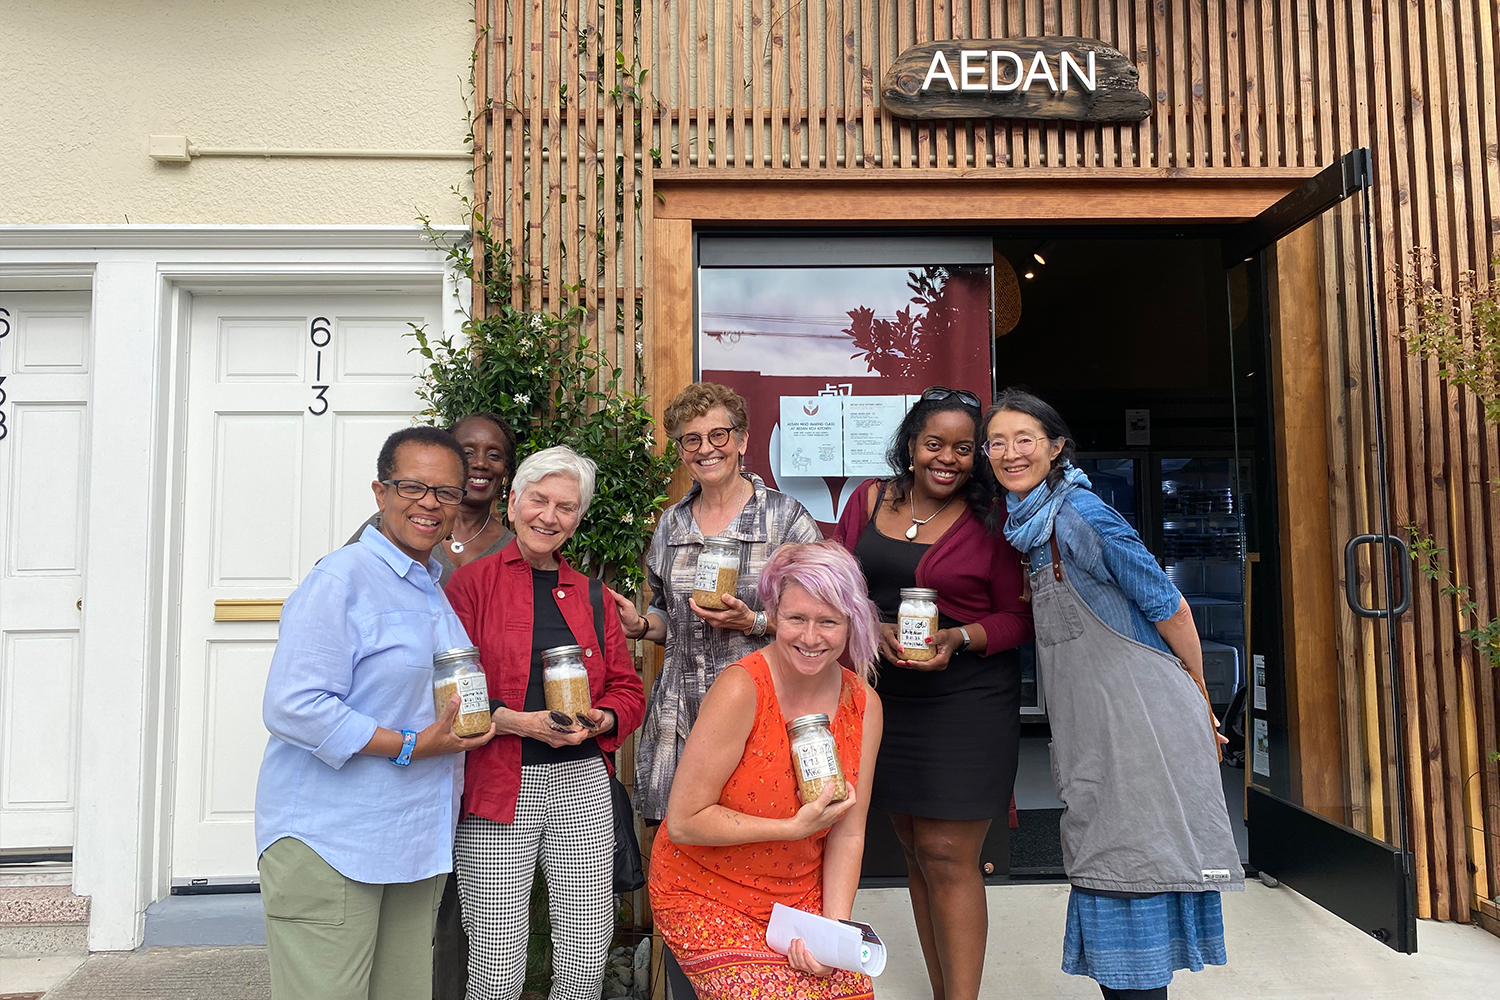 A miso-making class at Aedan, with owner Mariko Grady on the right